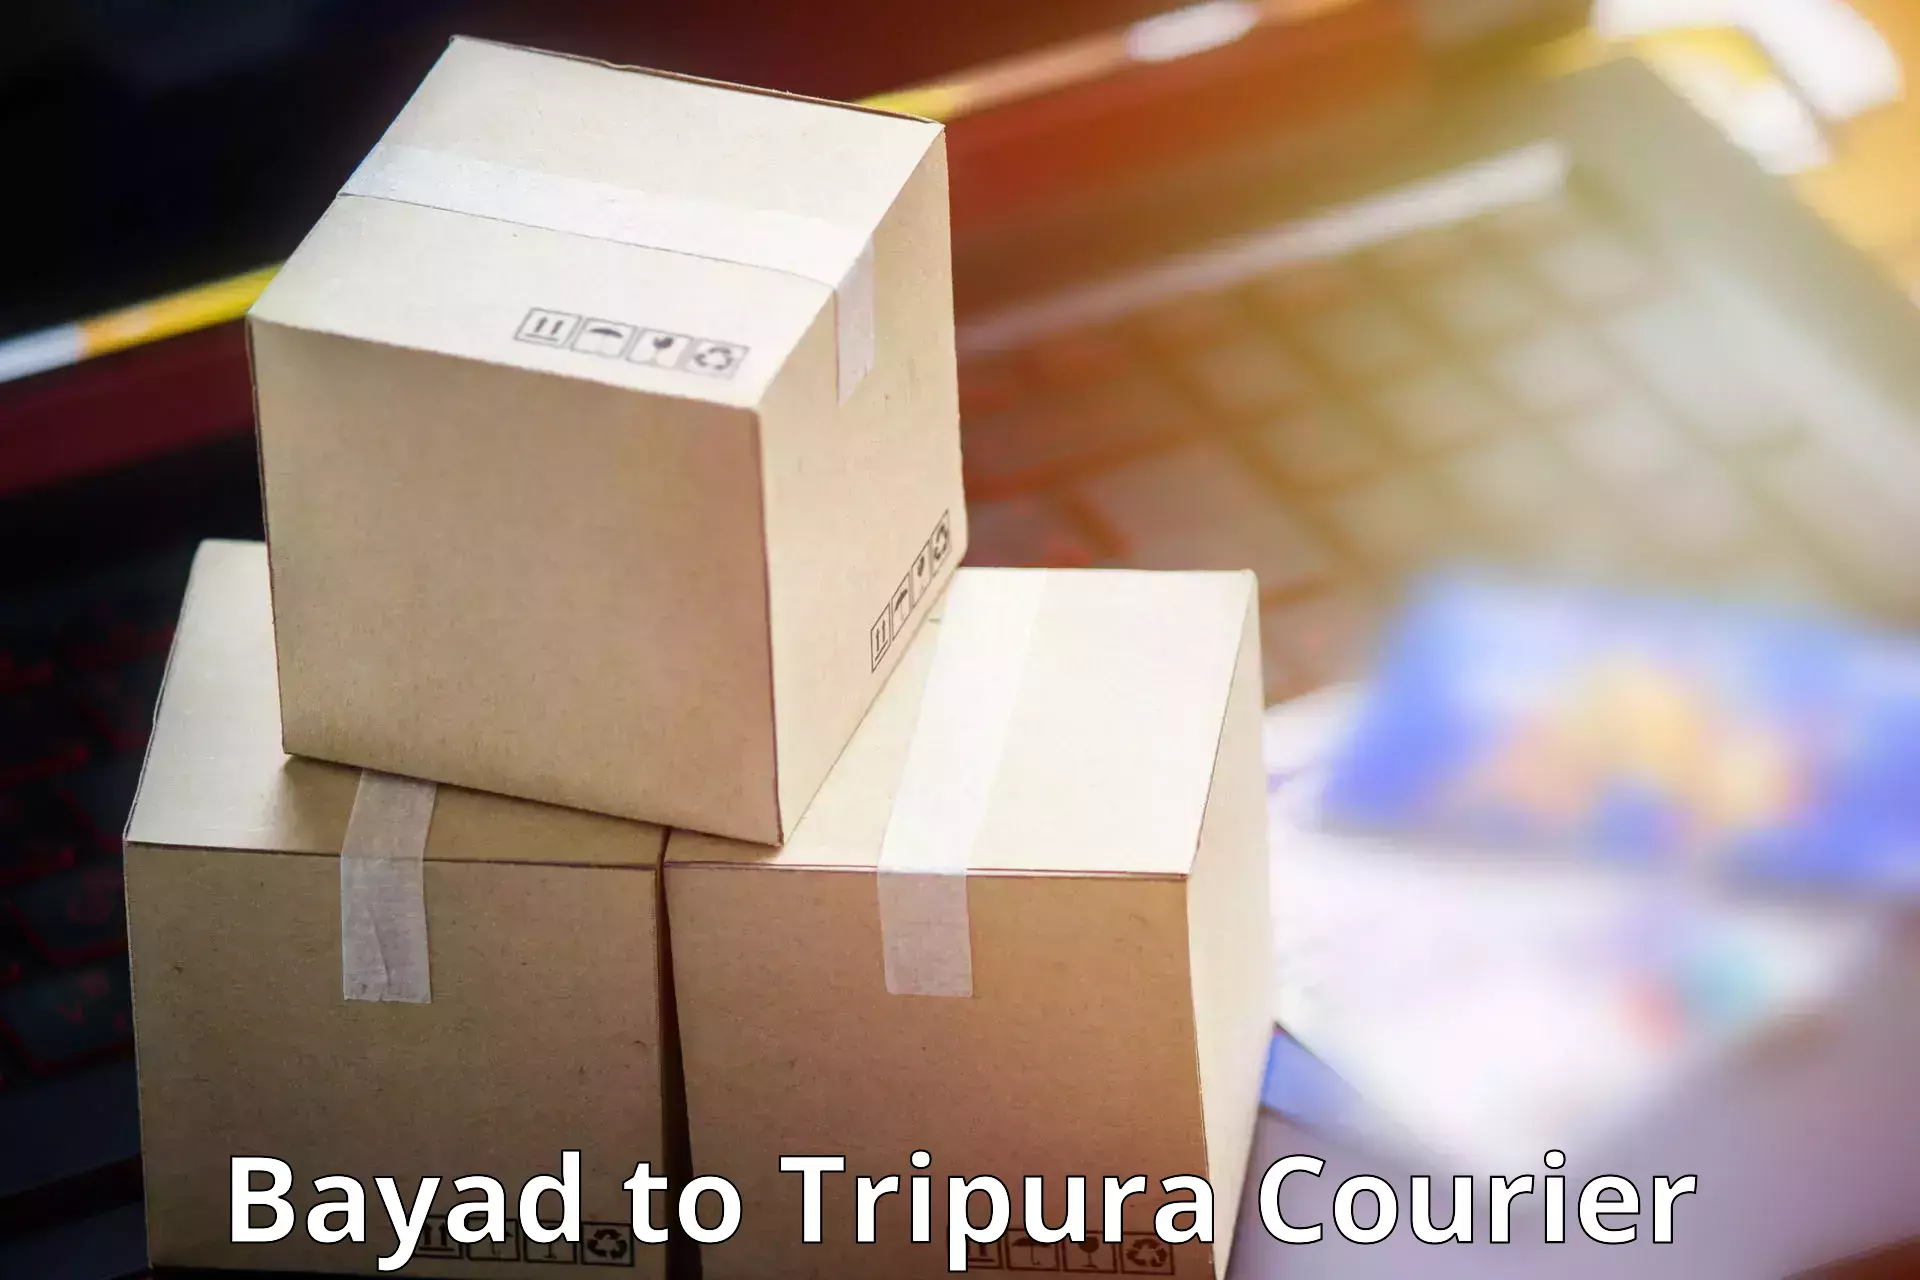 Fast delivery service Bayad to Tripura